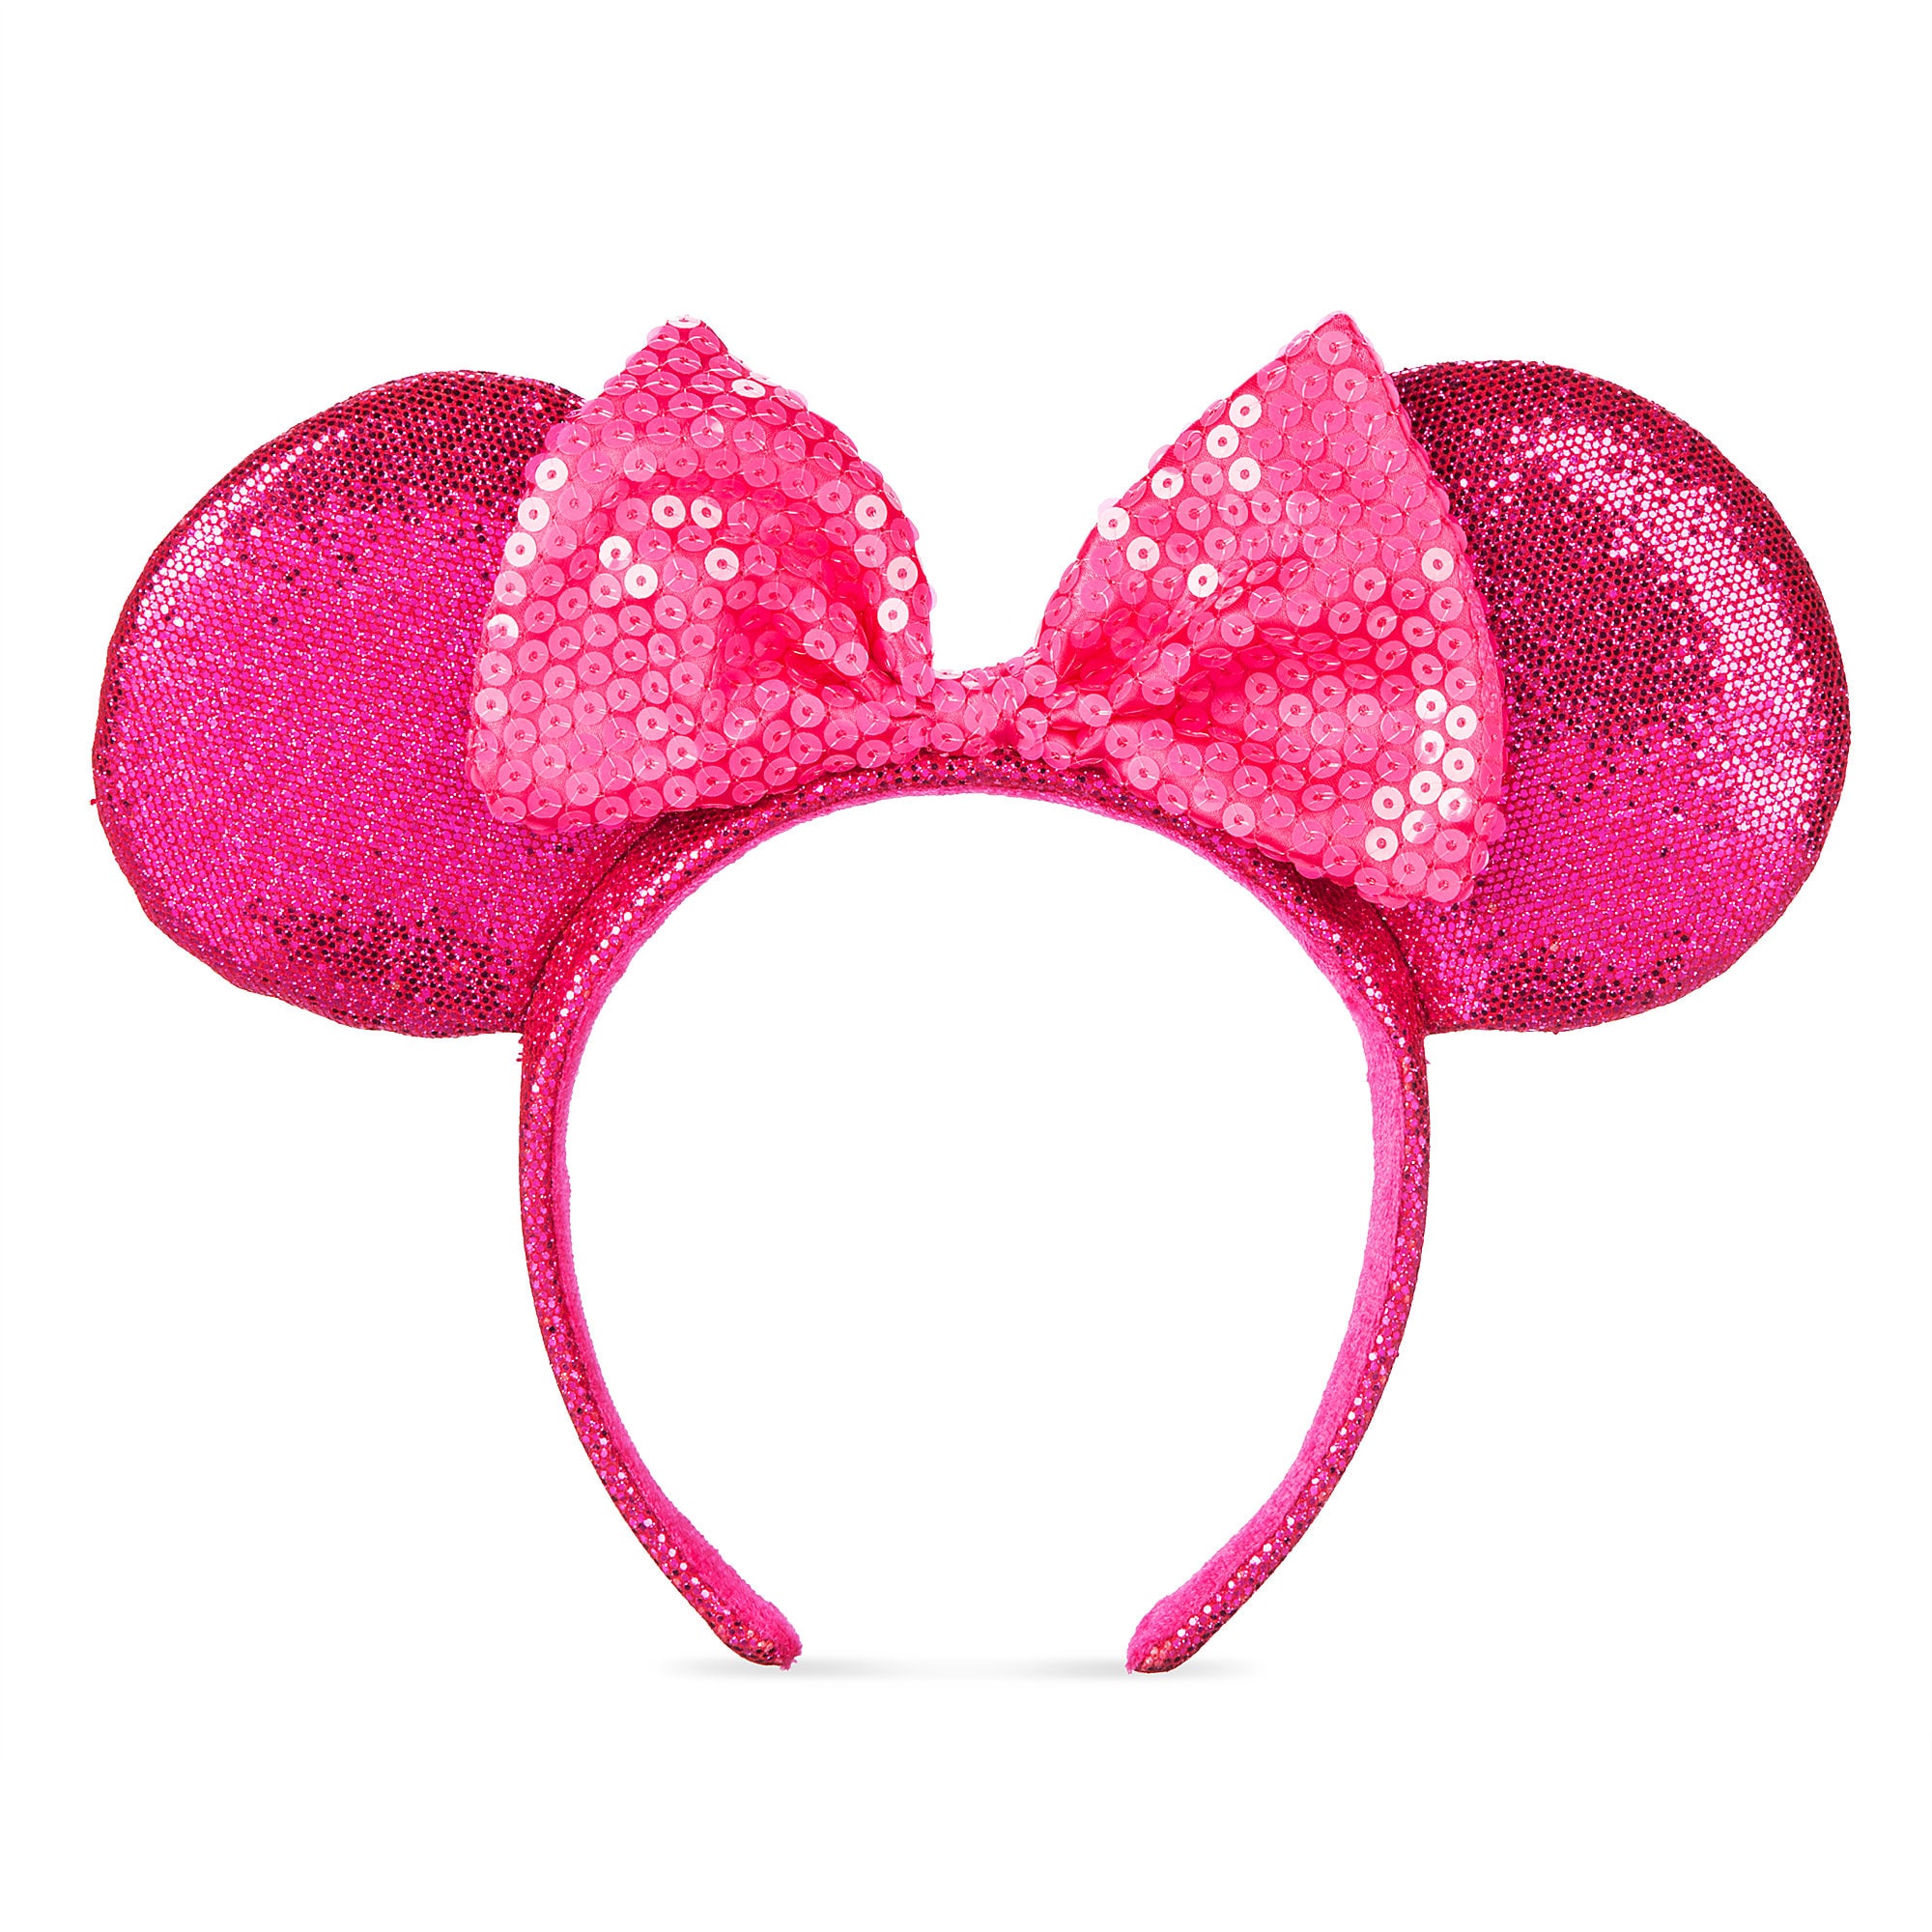 Minnie Mouse Glitter and Sequin Ear Headband – Imagination Pink image